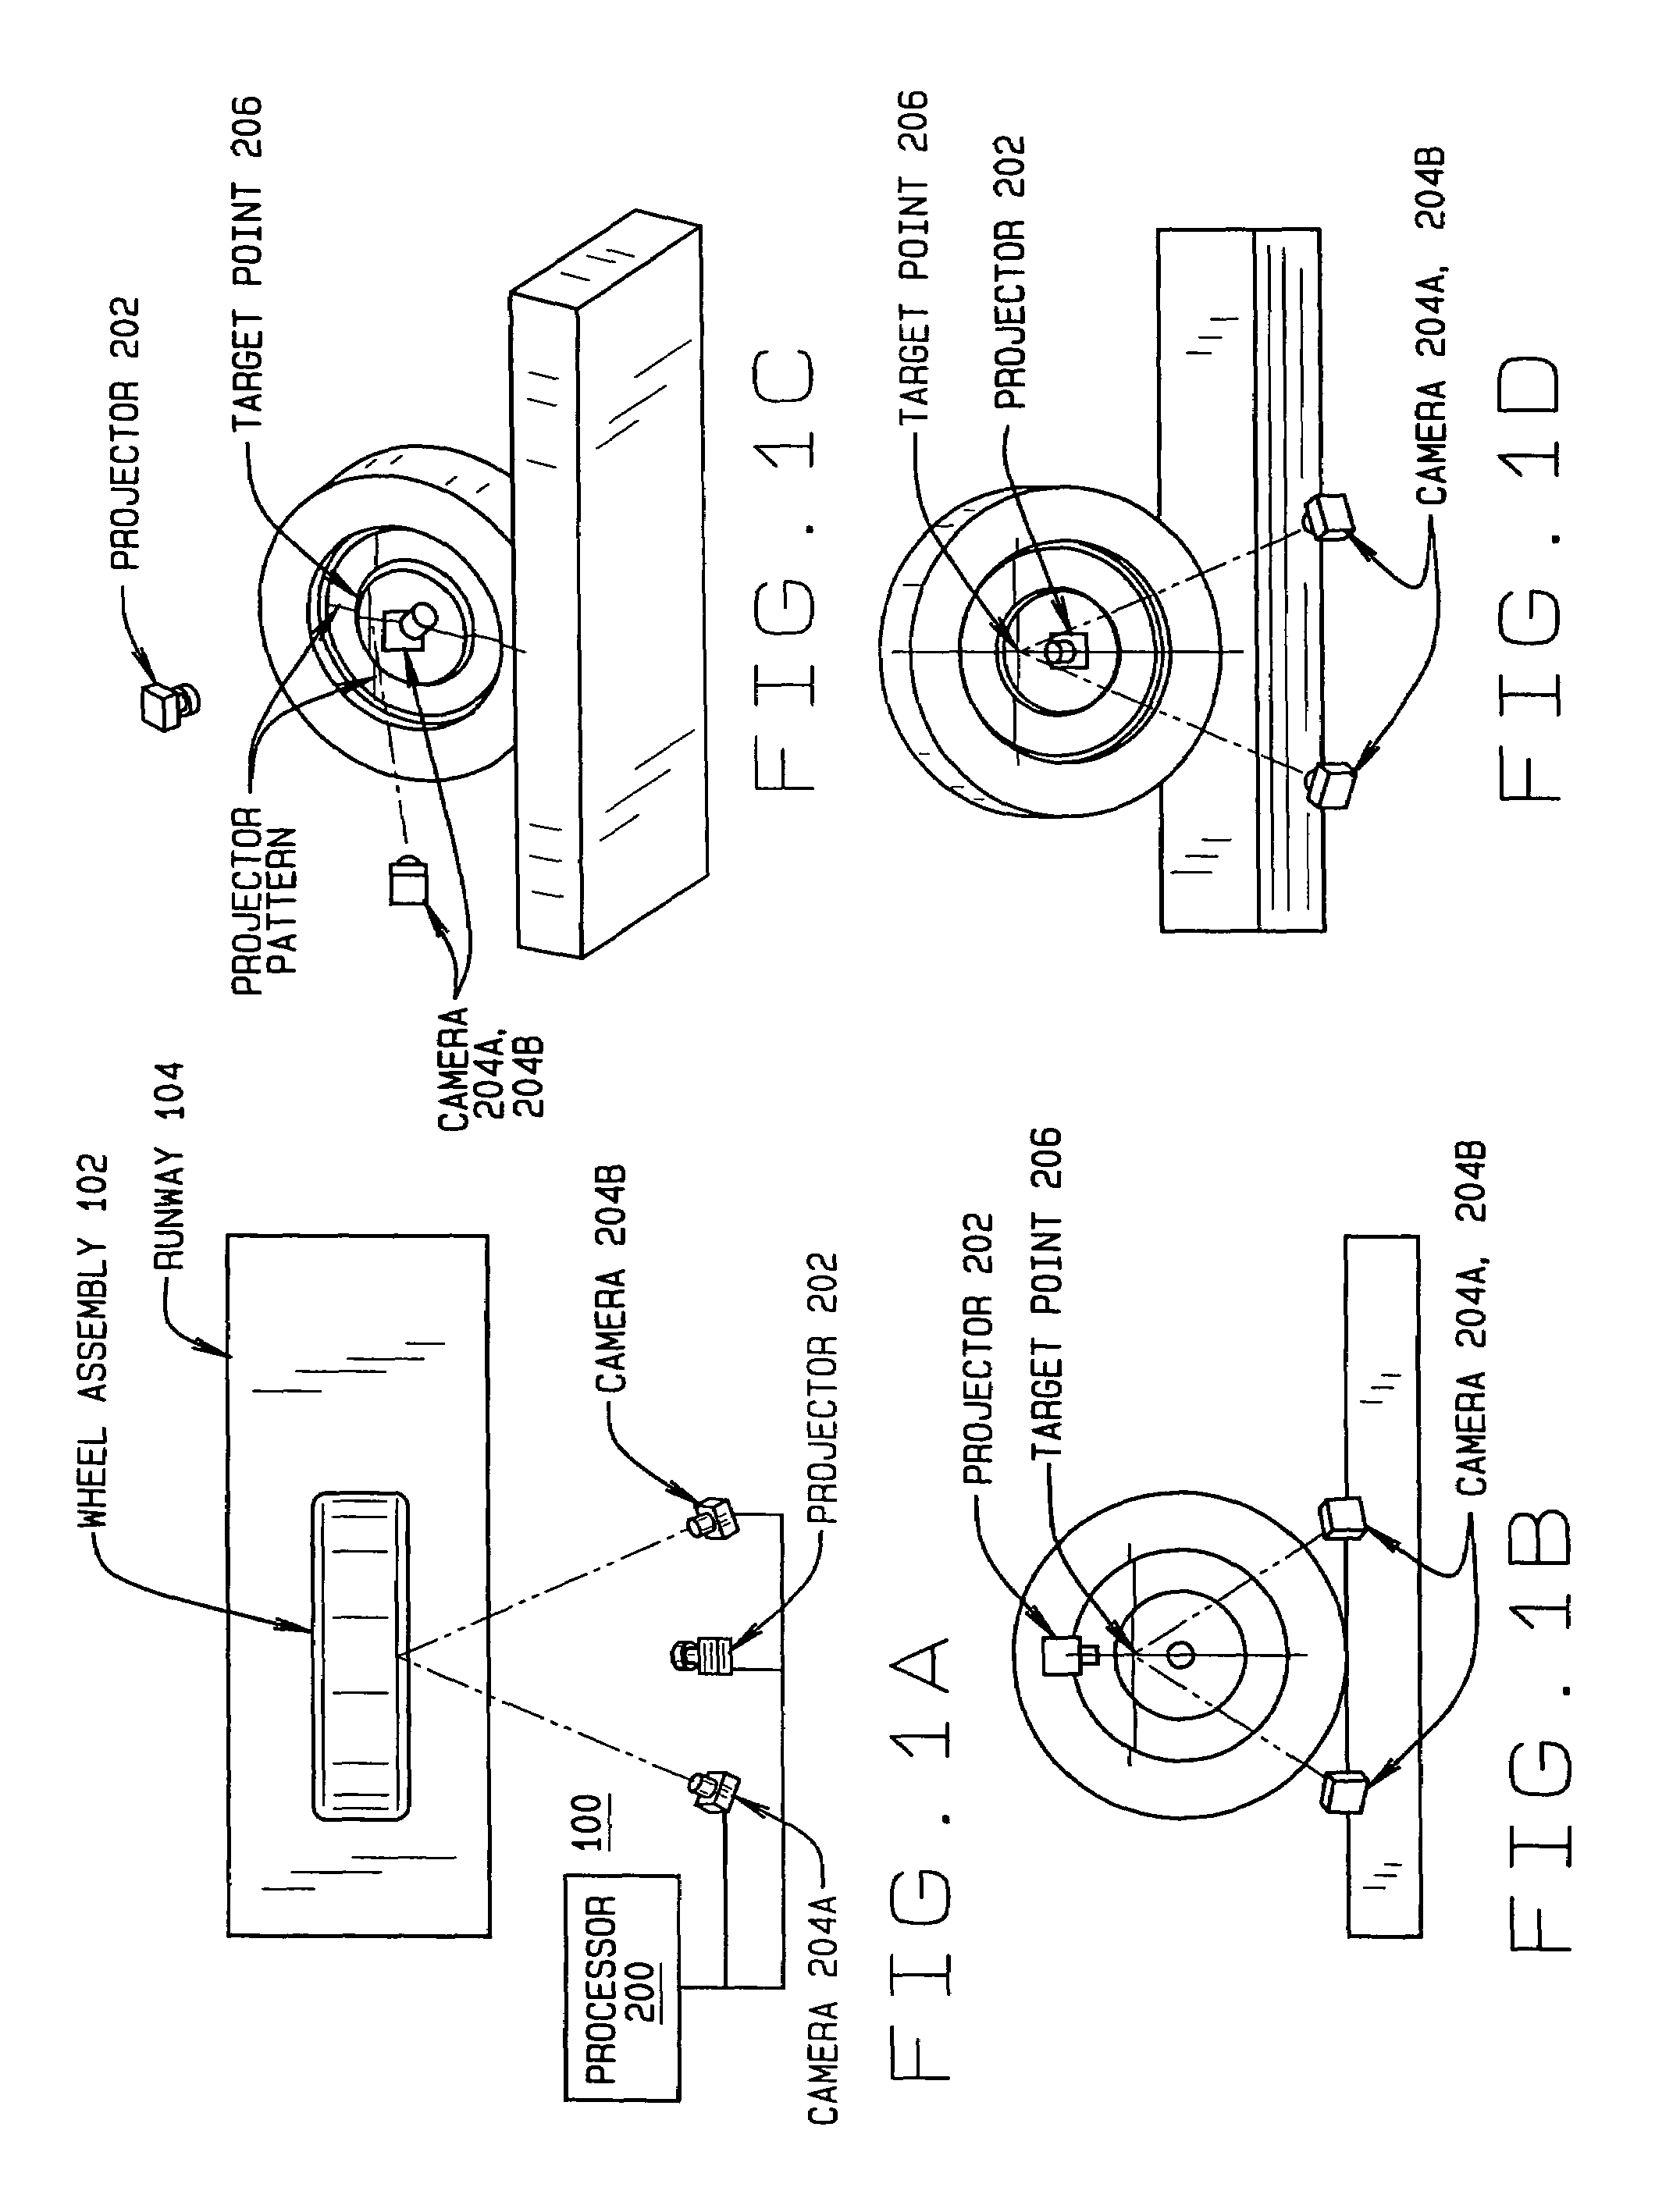 Method and apparatus for wheel alignment system target projection and illumination